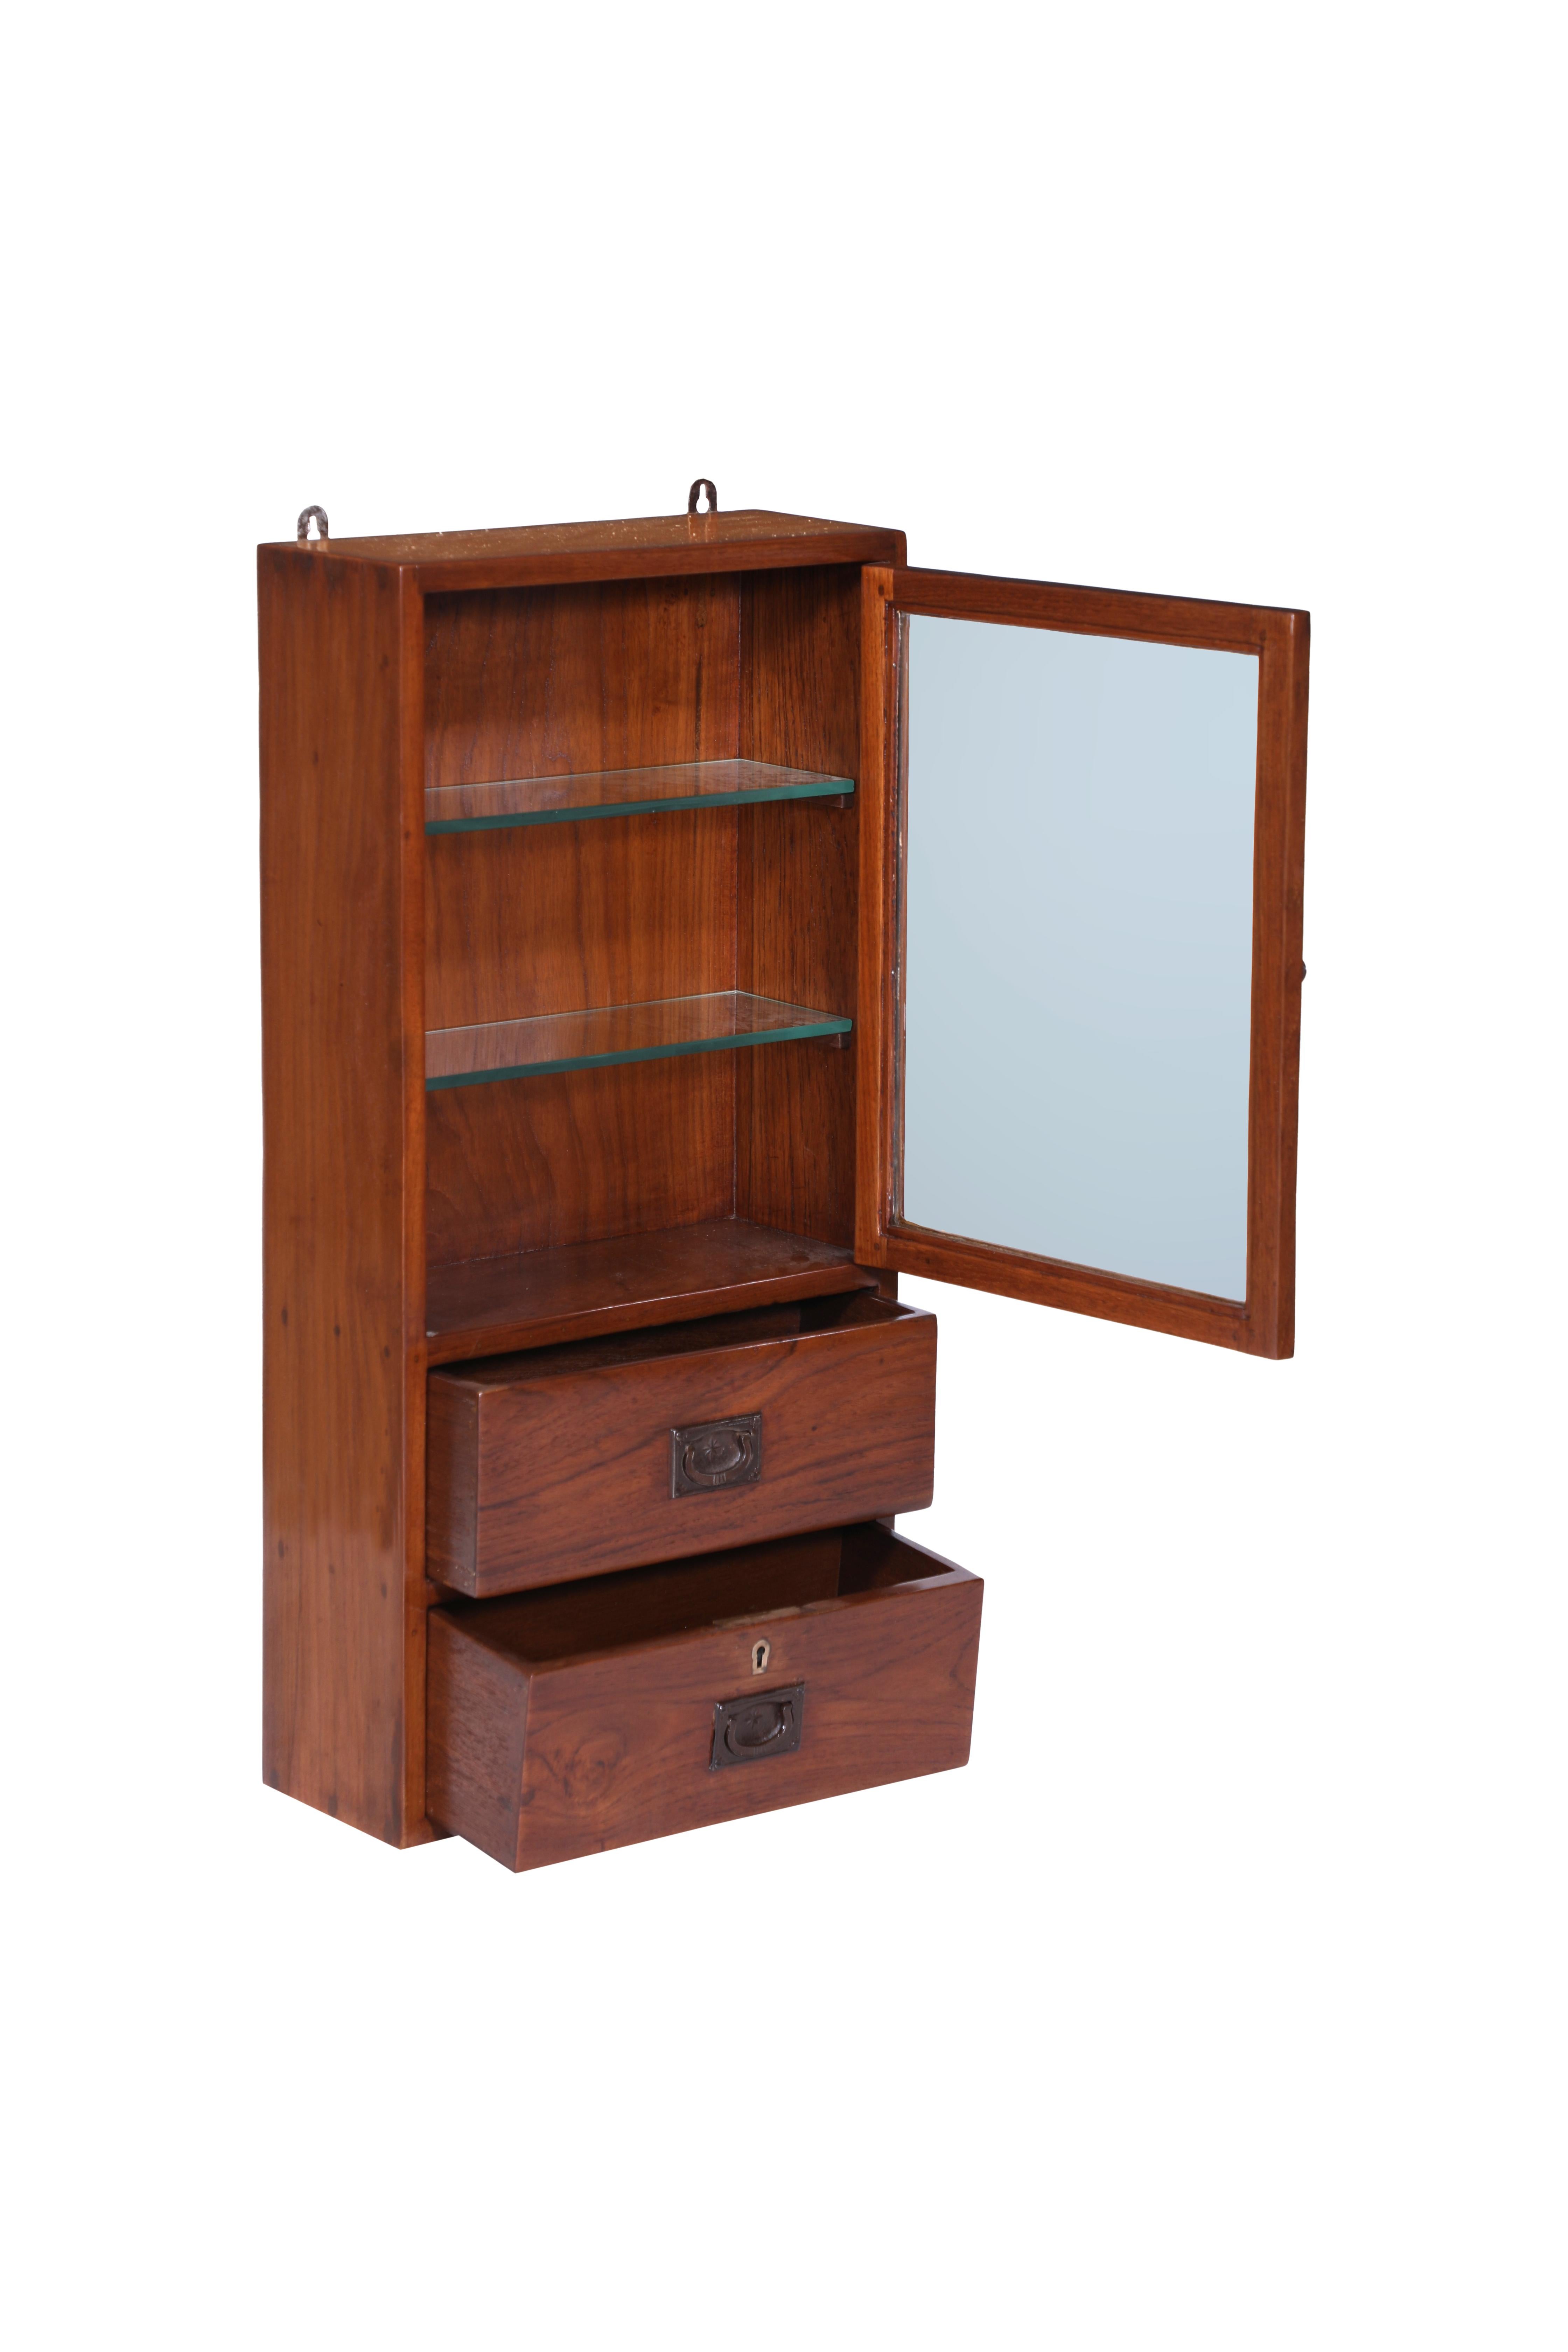 British Colonial Teak Wood Glass-Front Wall Cabinet with Shelves and Drawers For Sale